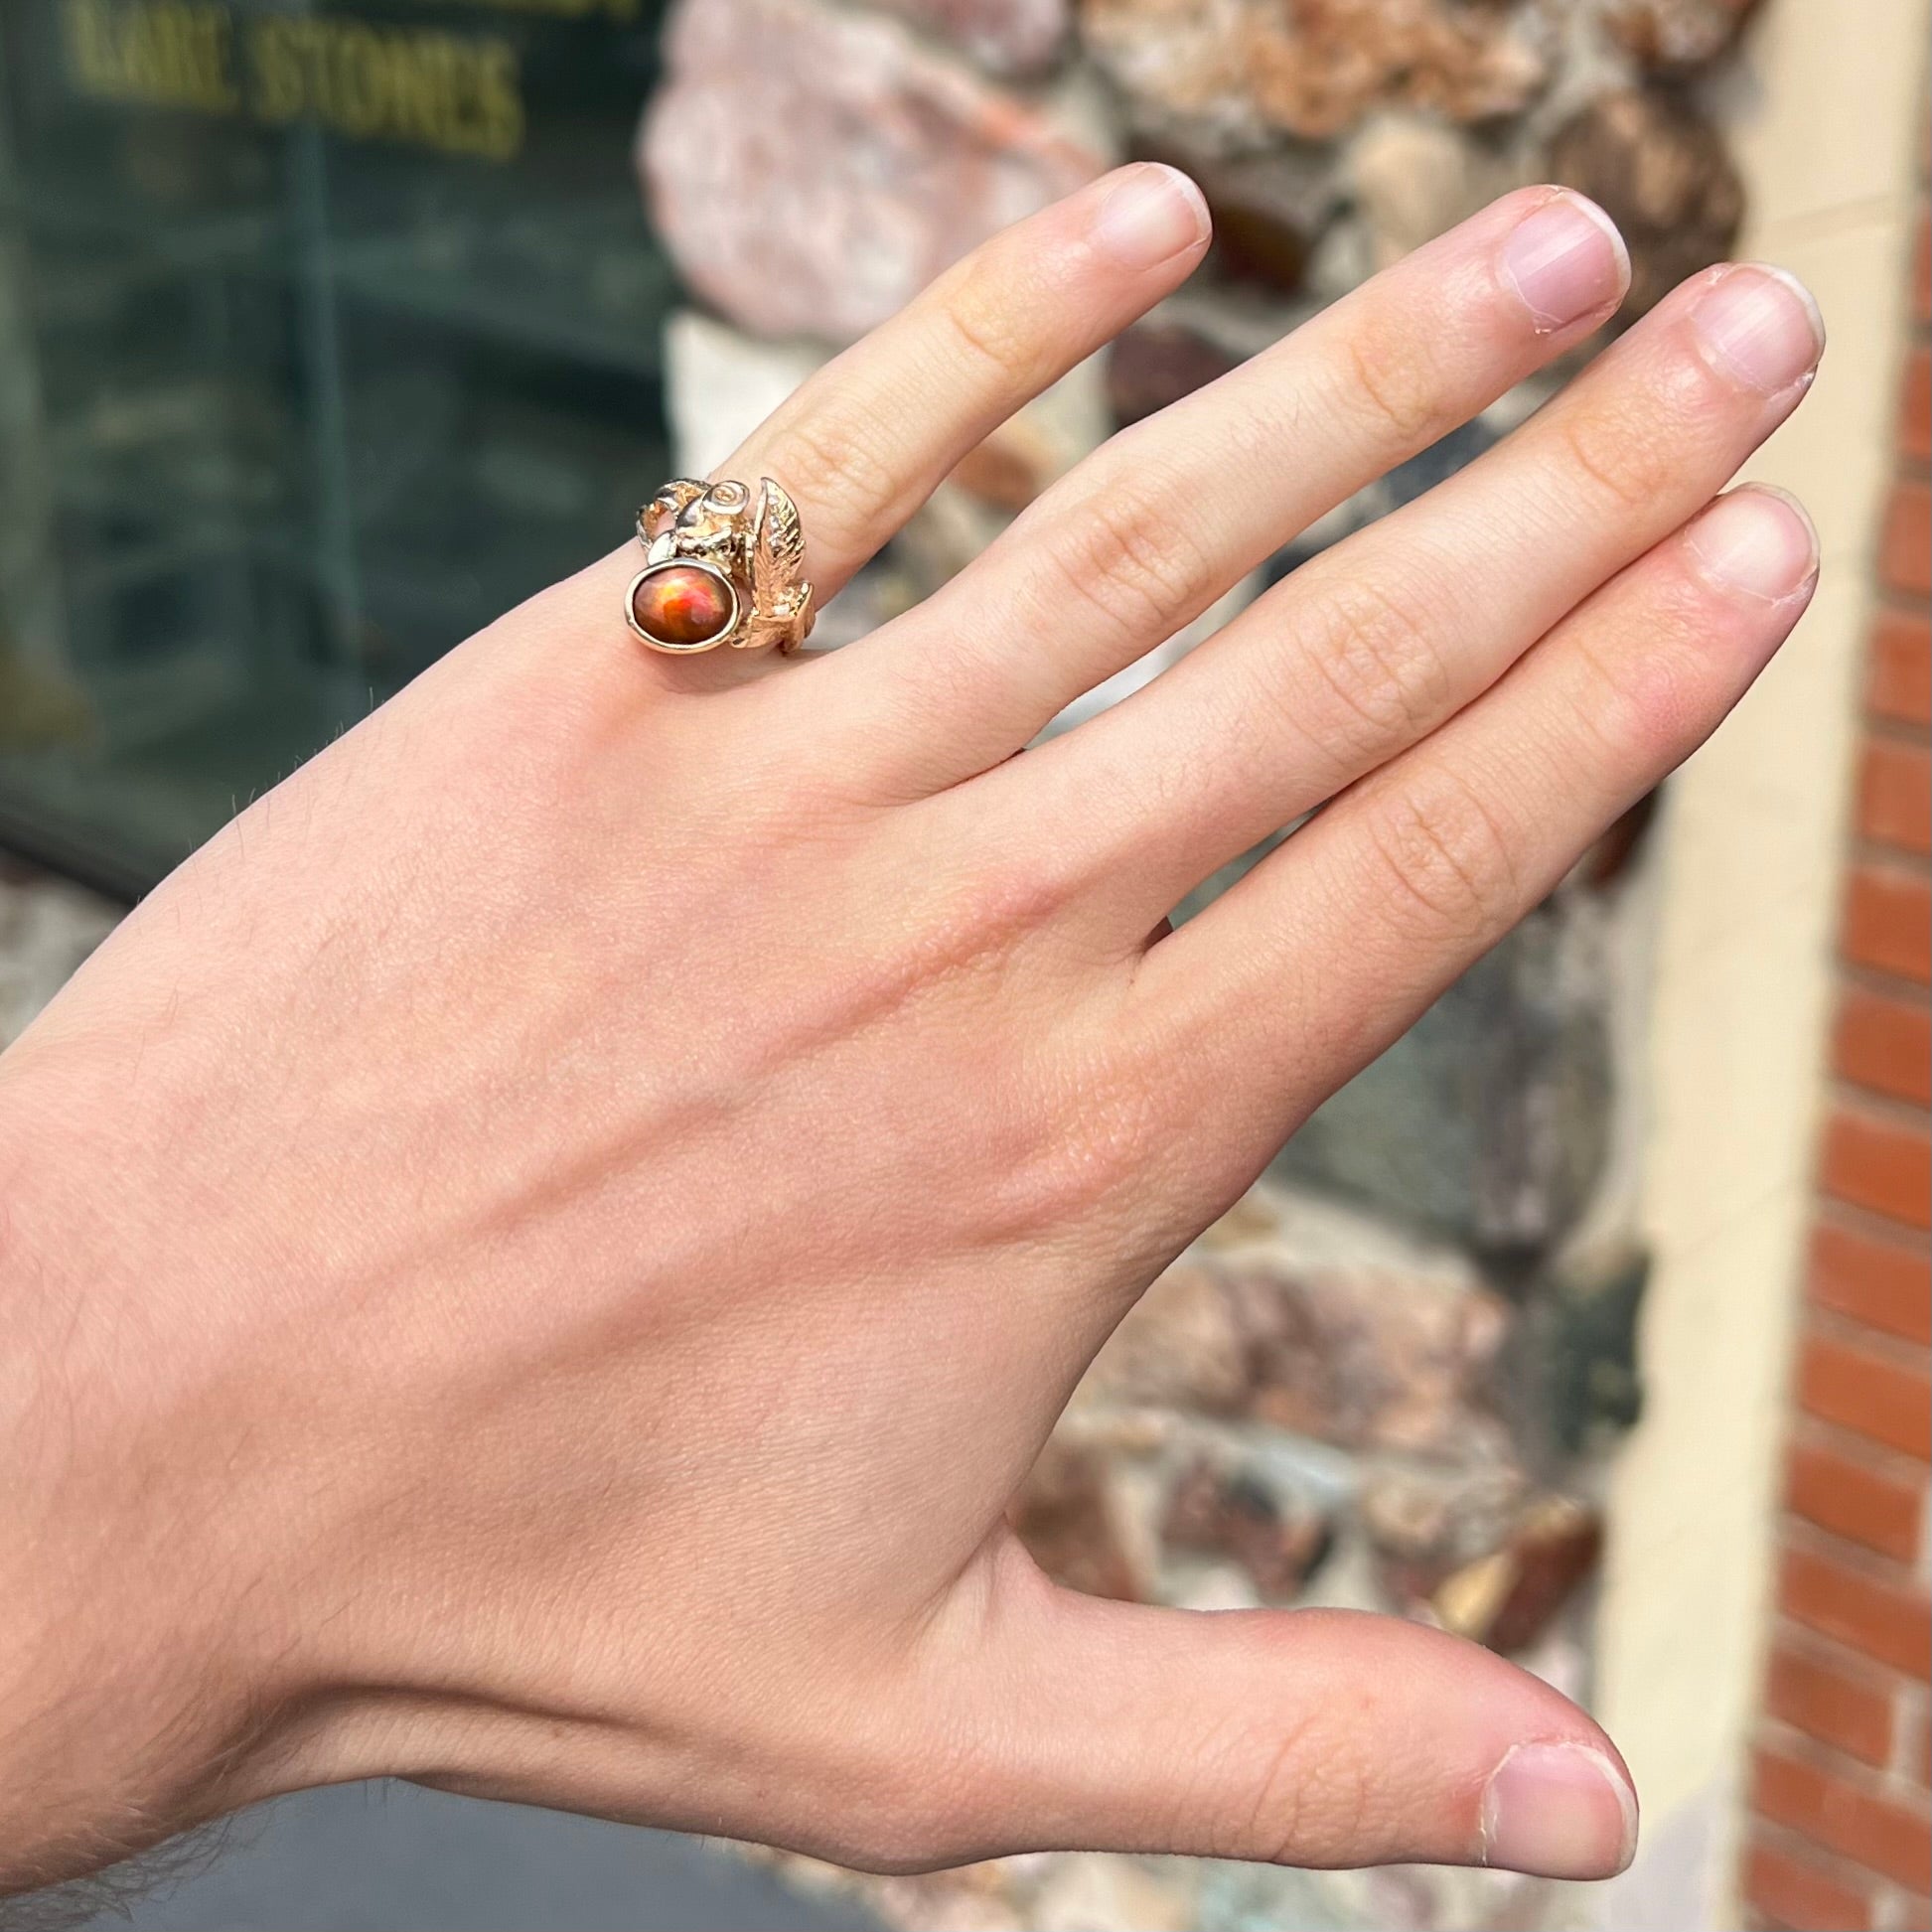 A ladies' yellow gold flower style ring set with an oval cabochon cut fire agate and diamond accents.